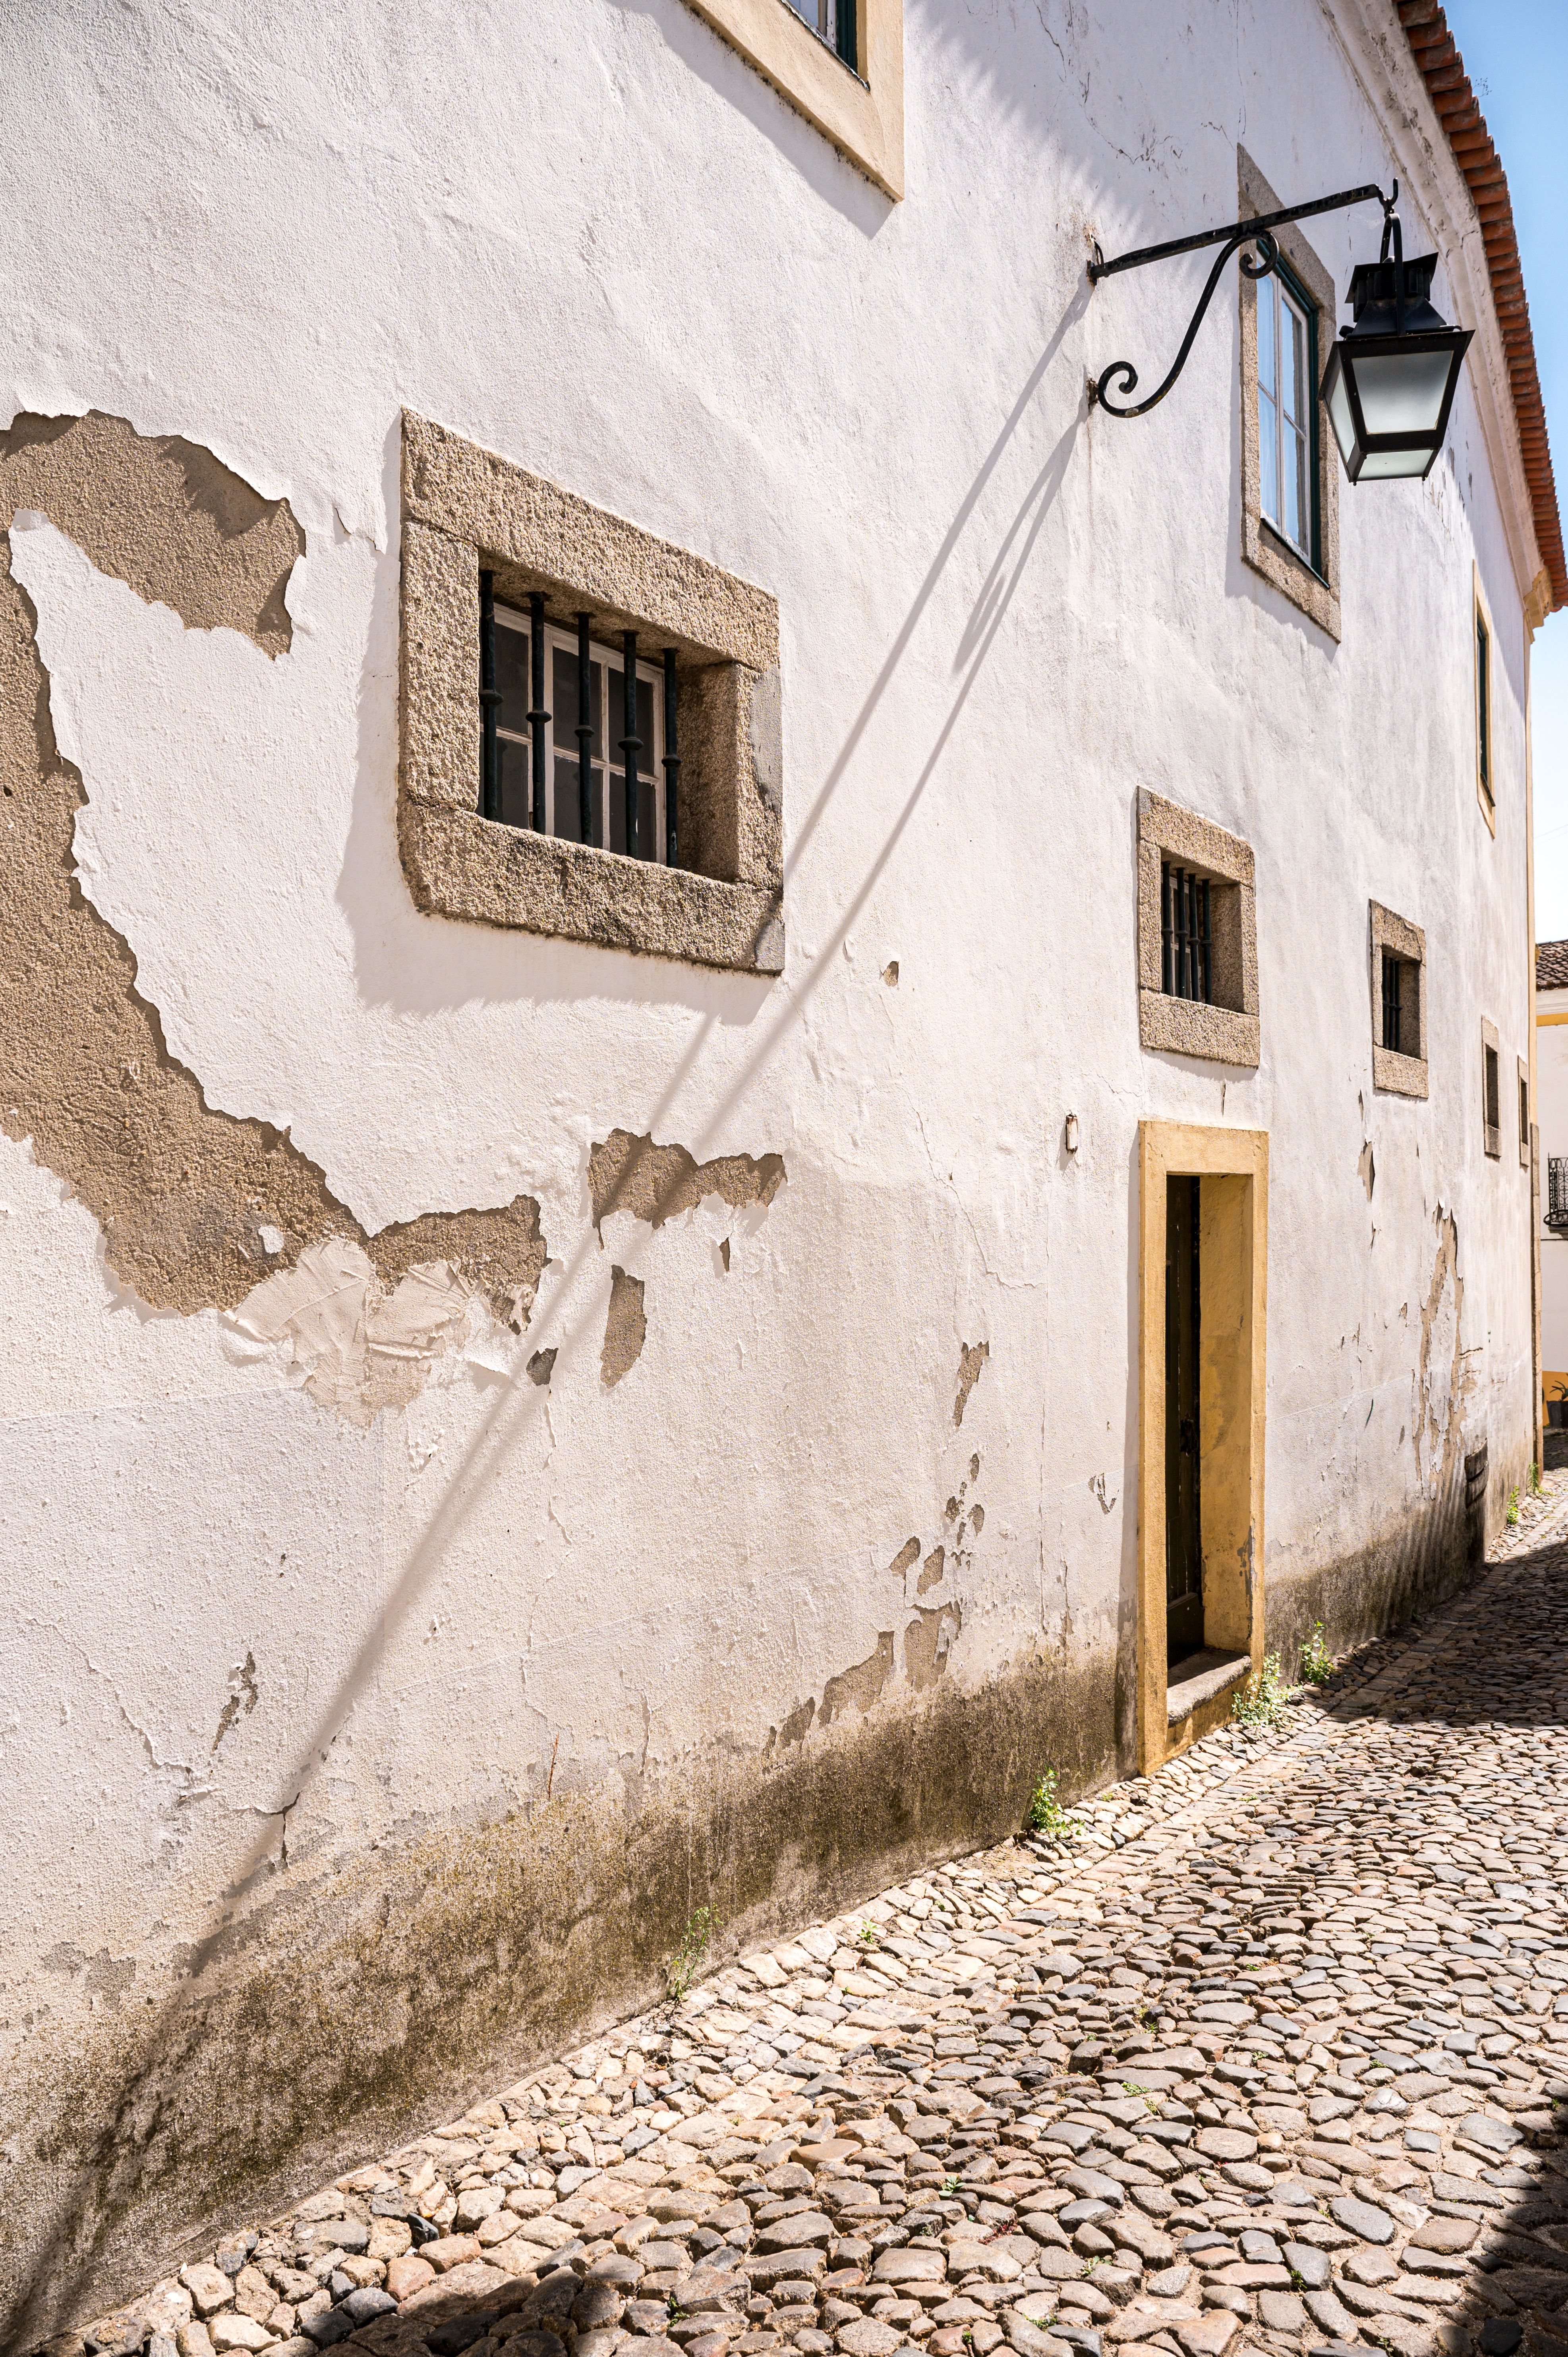 Old cobblestone street in Portugal with yellow doorway and lamp